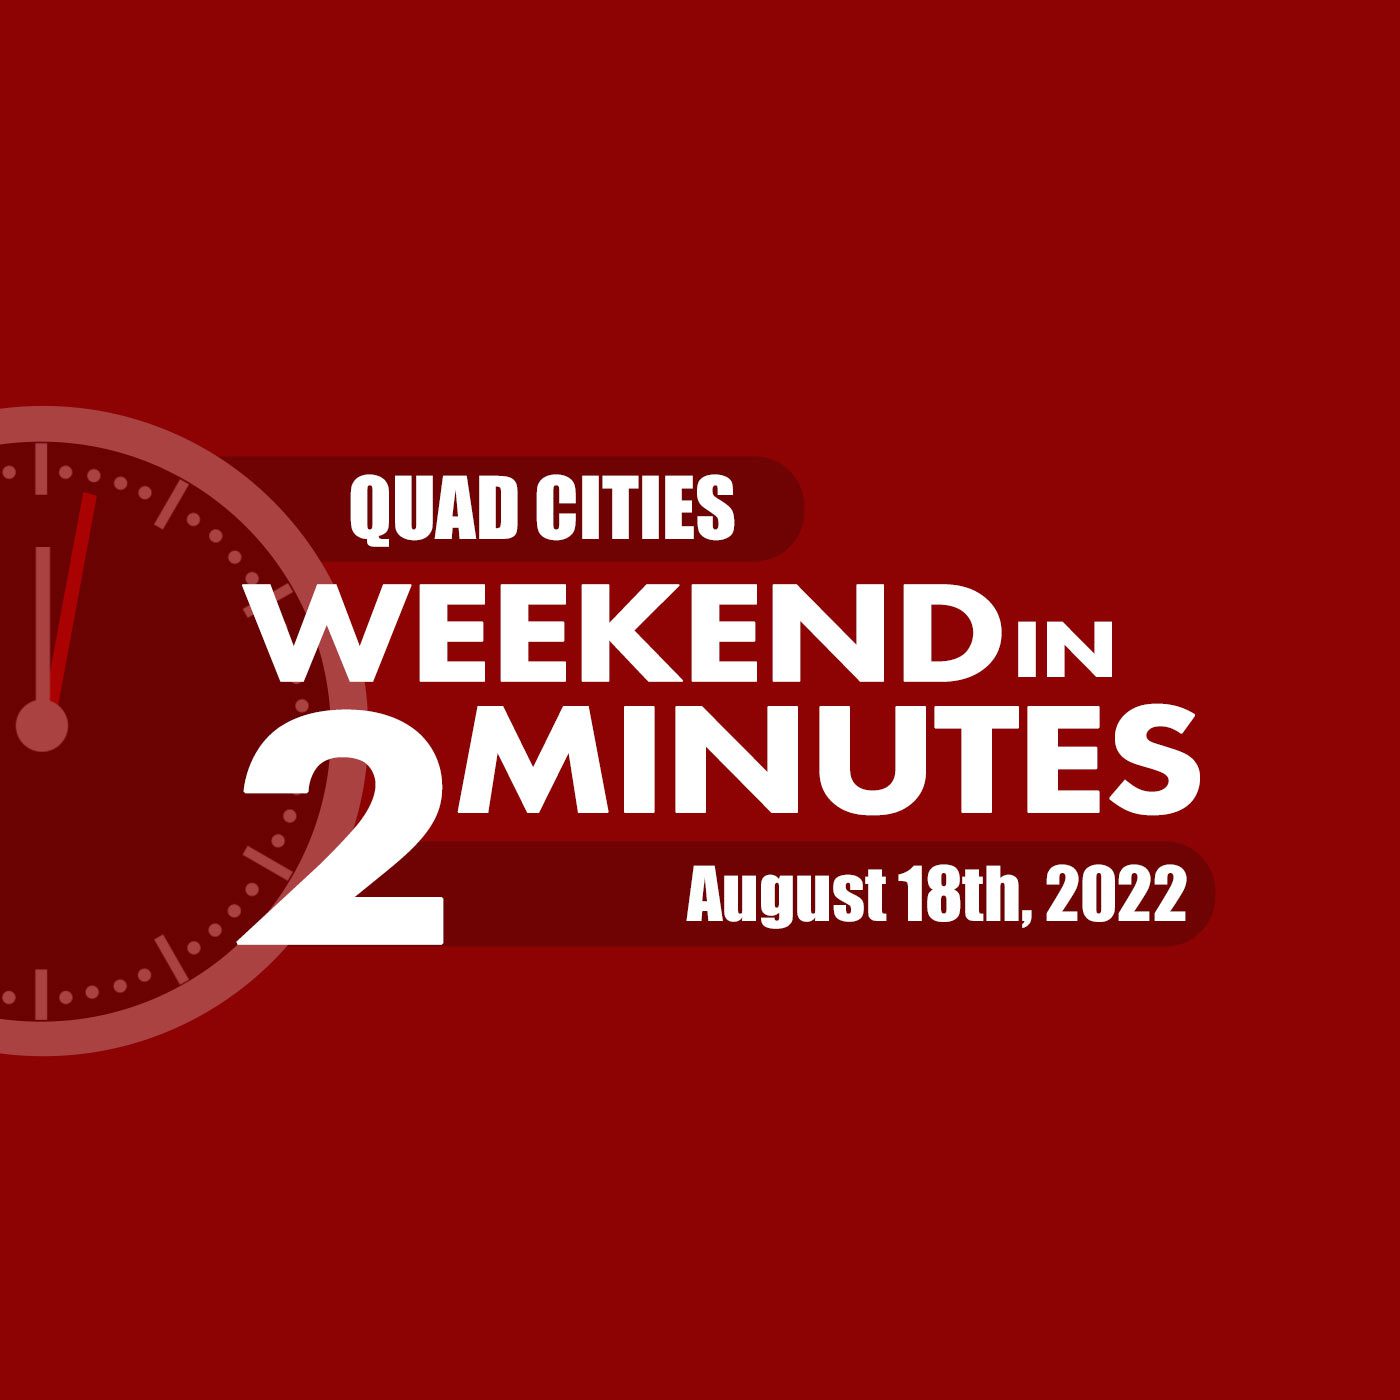 Quad Cities Weekend In 2 Minutes August 18th, 2022 Quad Cities